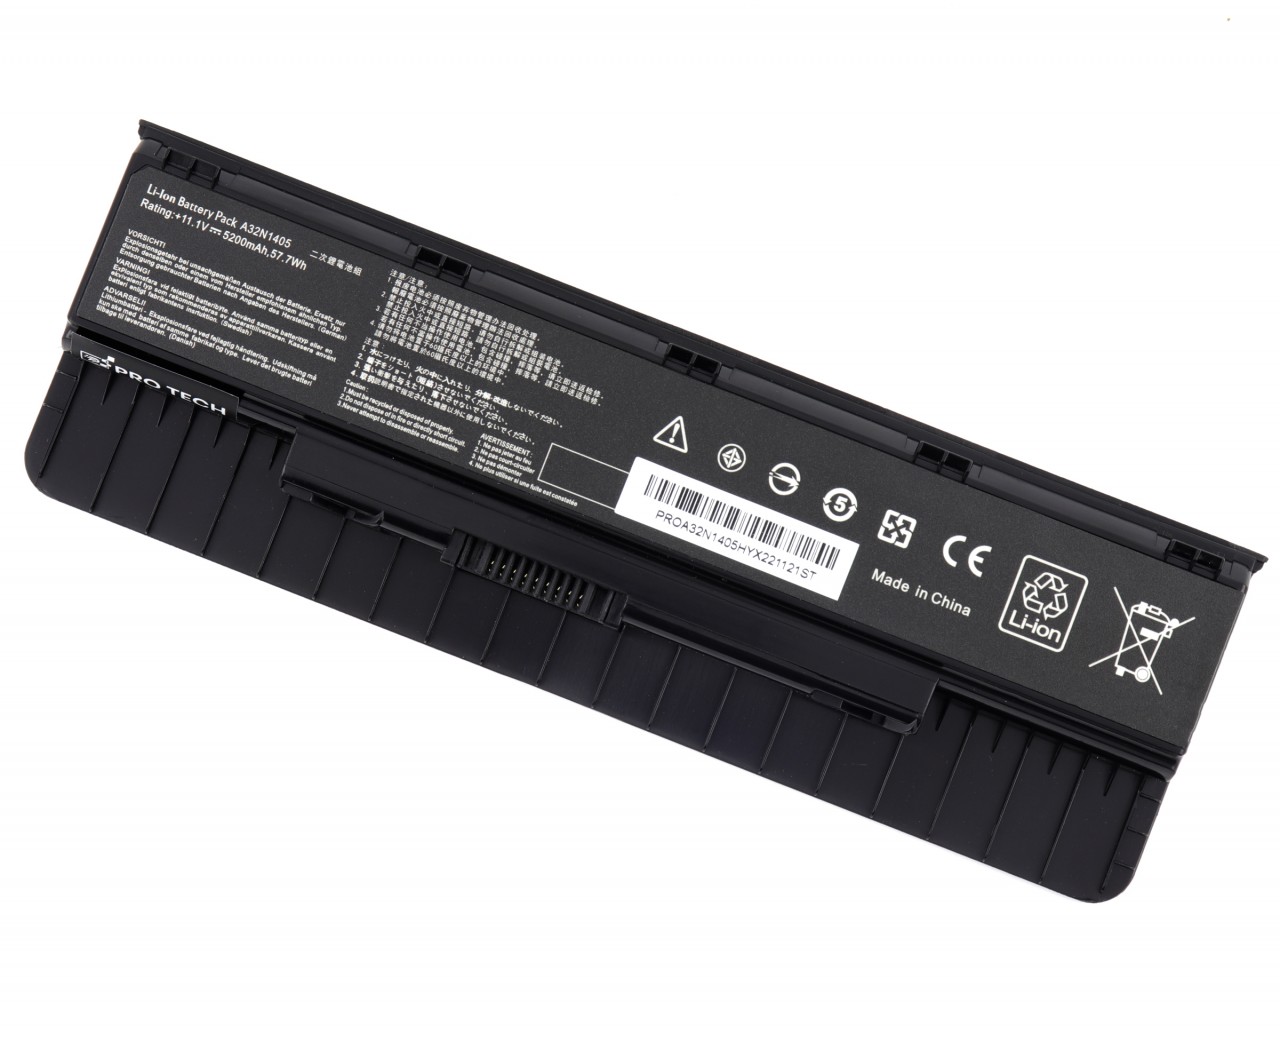 Baterie Asus G551VW 57.7Wh / 5200mAh Protech High Quality Replacement